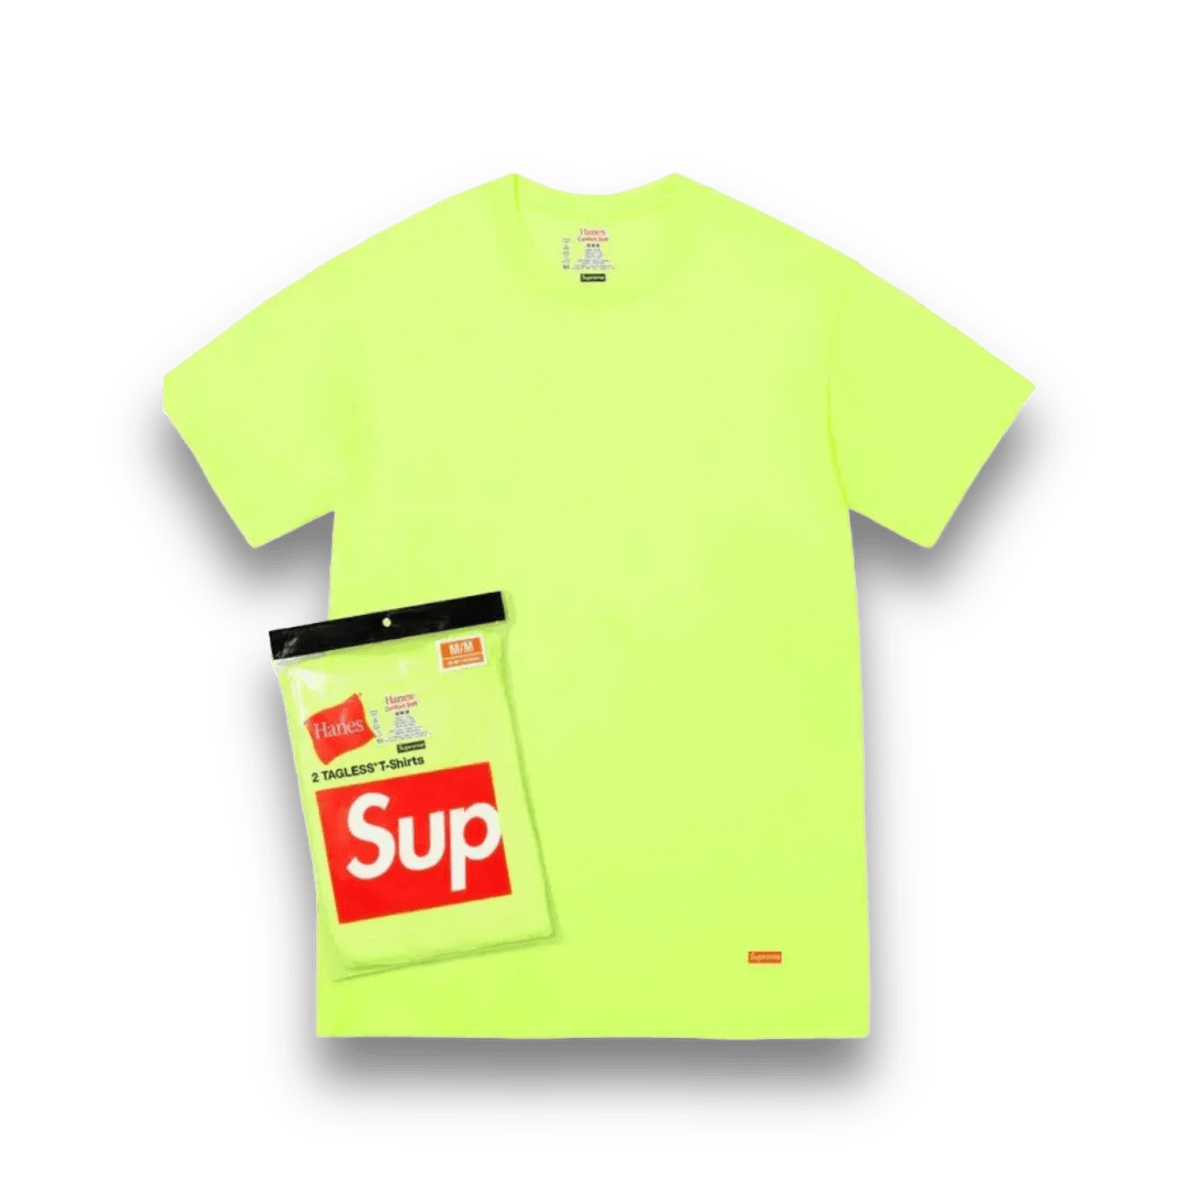 Supreme Hanes Tagless Tees Fluorescent Yellow (3 Pack) - Outerwear - Jawns on Fire Sneakers & Streetwear